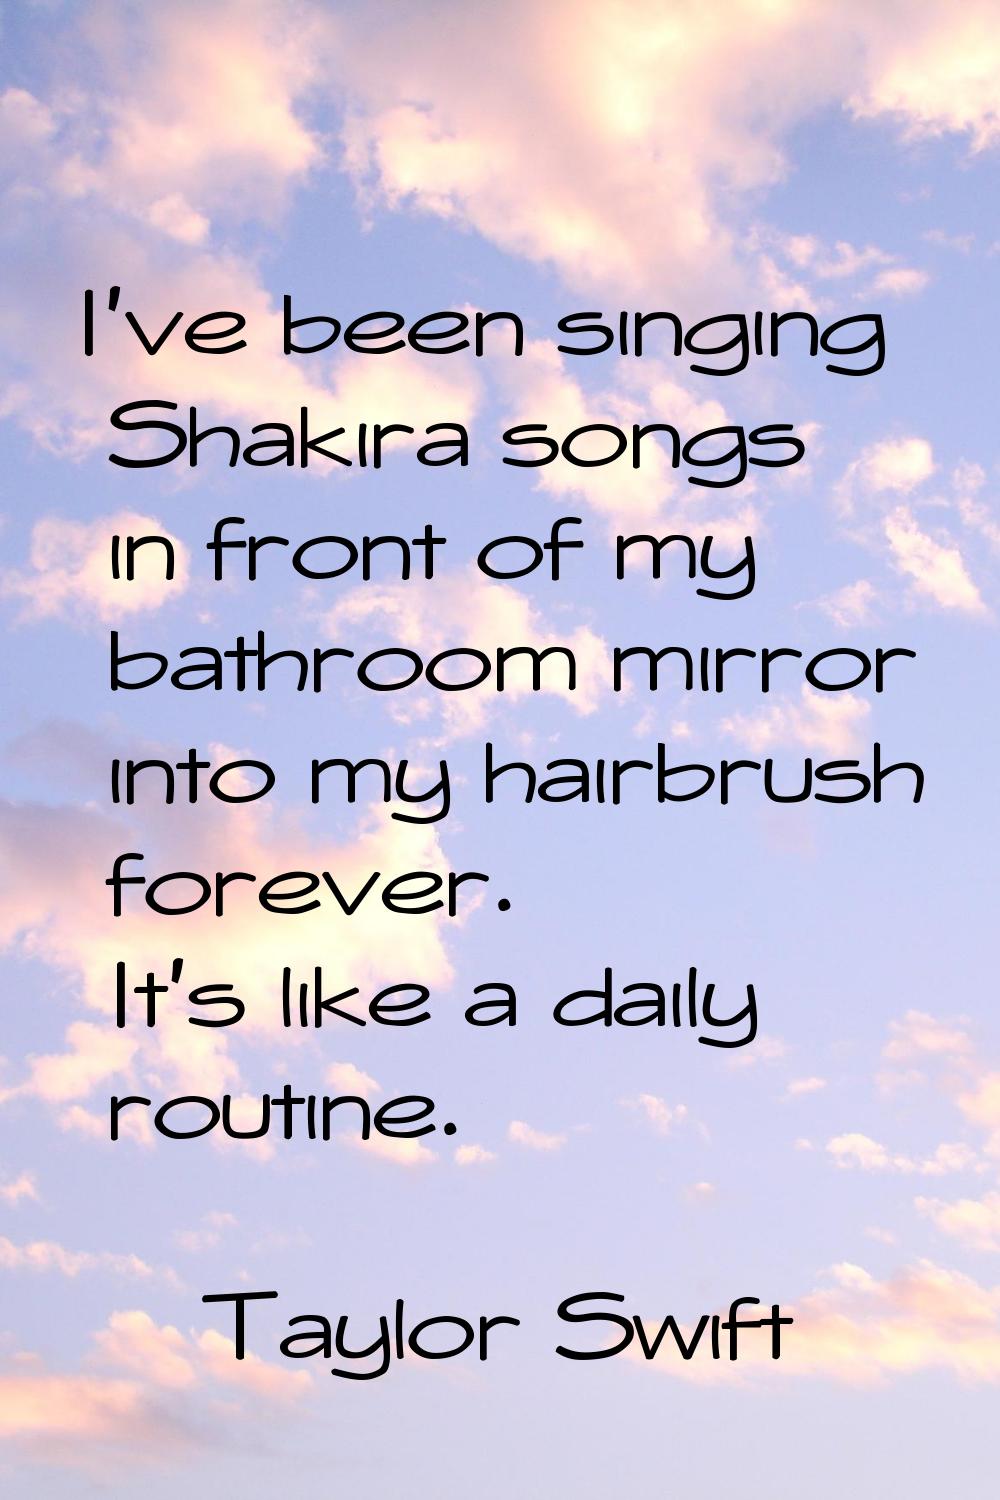 I've been singing Shakira songs in front of my bathroom mirror into my hairbrush forever. It's like